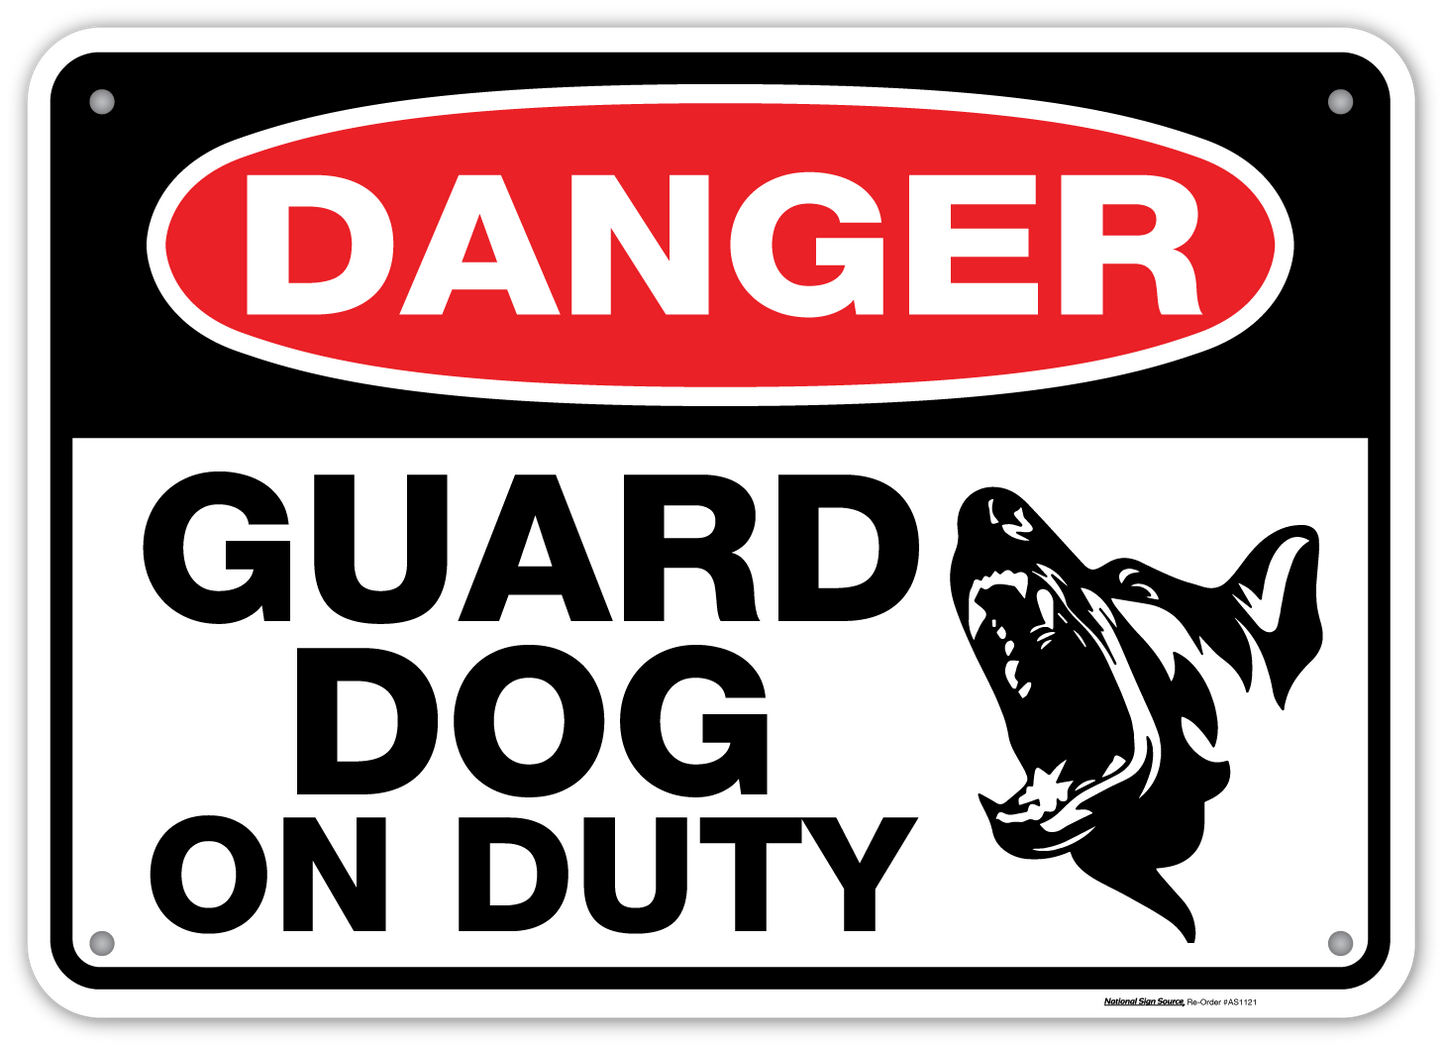 Danger - Guard dog on duty signs. Available from nationalsignsource.com in outdoor durable vinyl decals, dibond signs and aluminum signs.